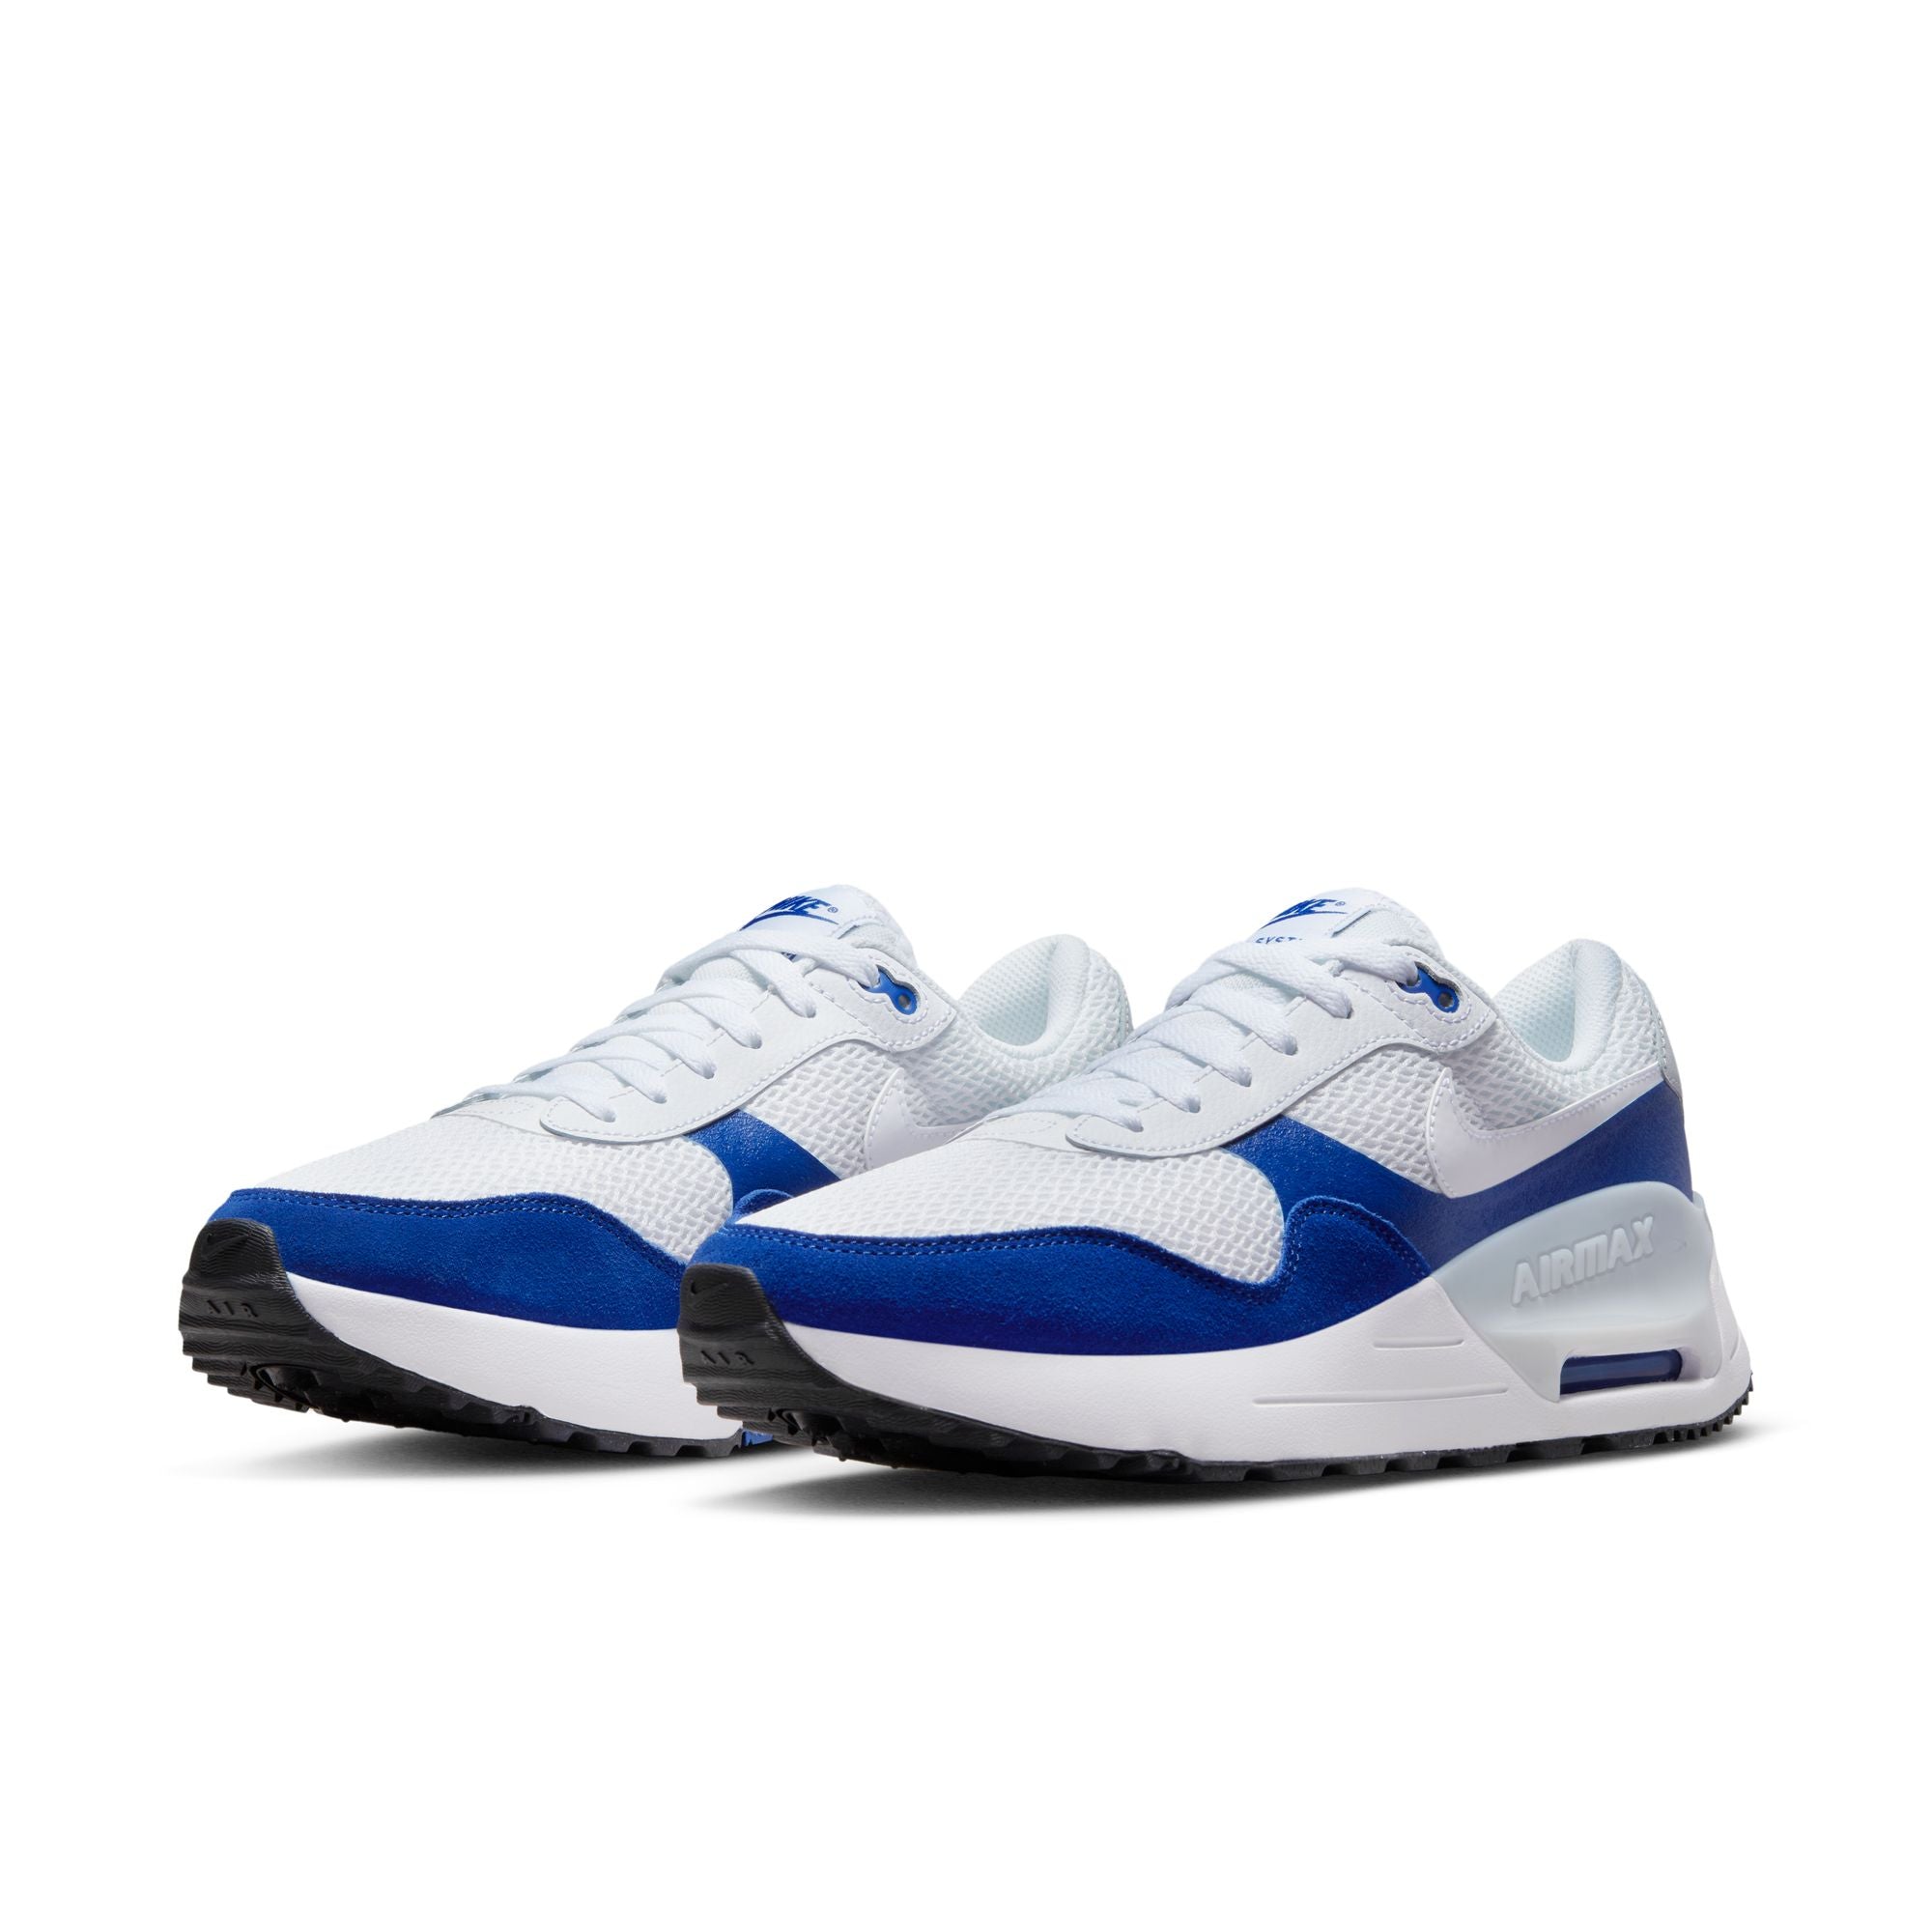 NIKE AIR MAX SYSTM MEN'S SHOES